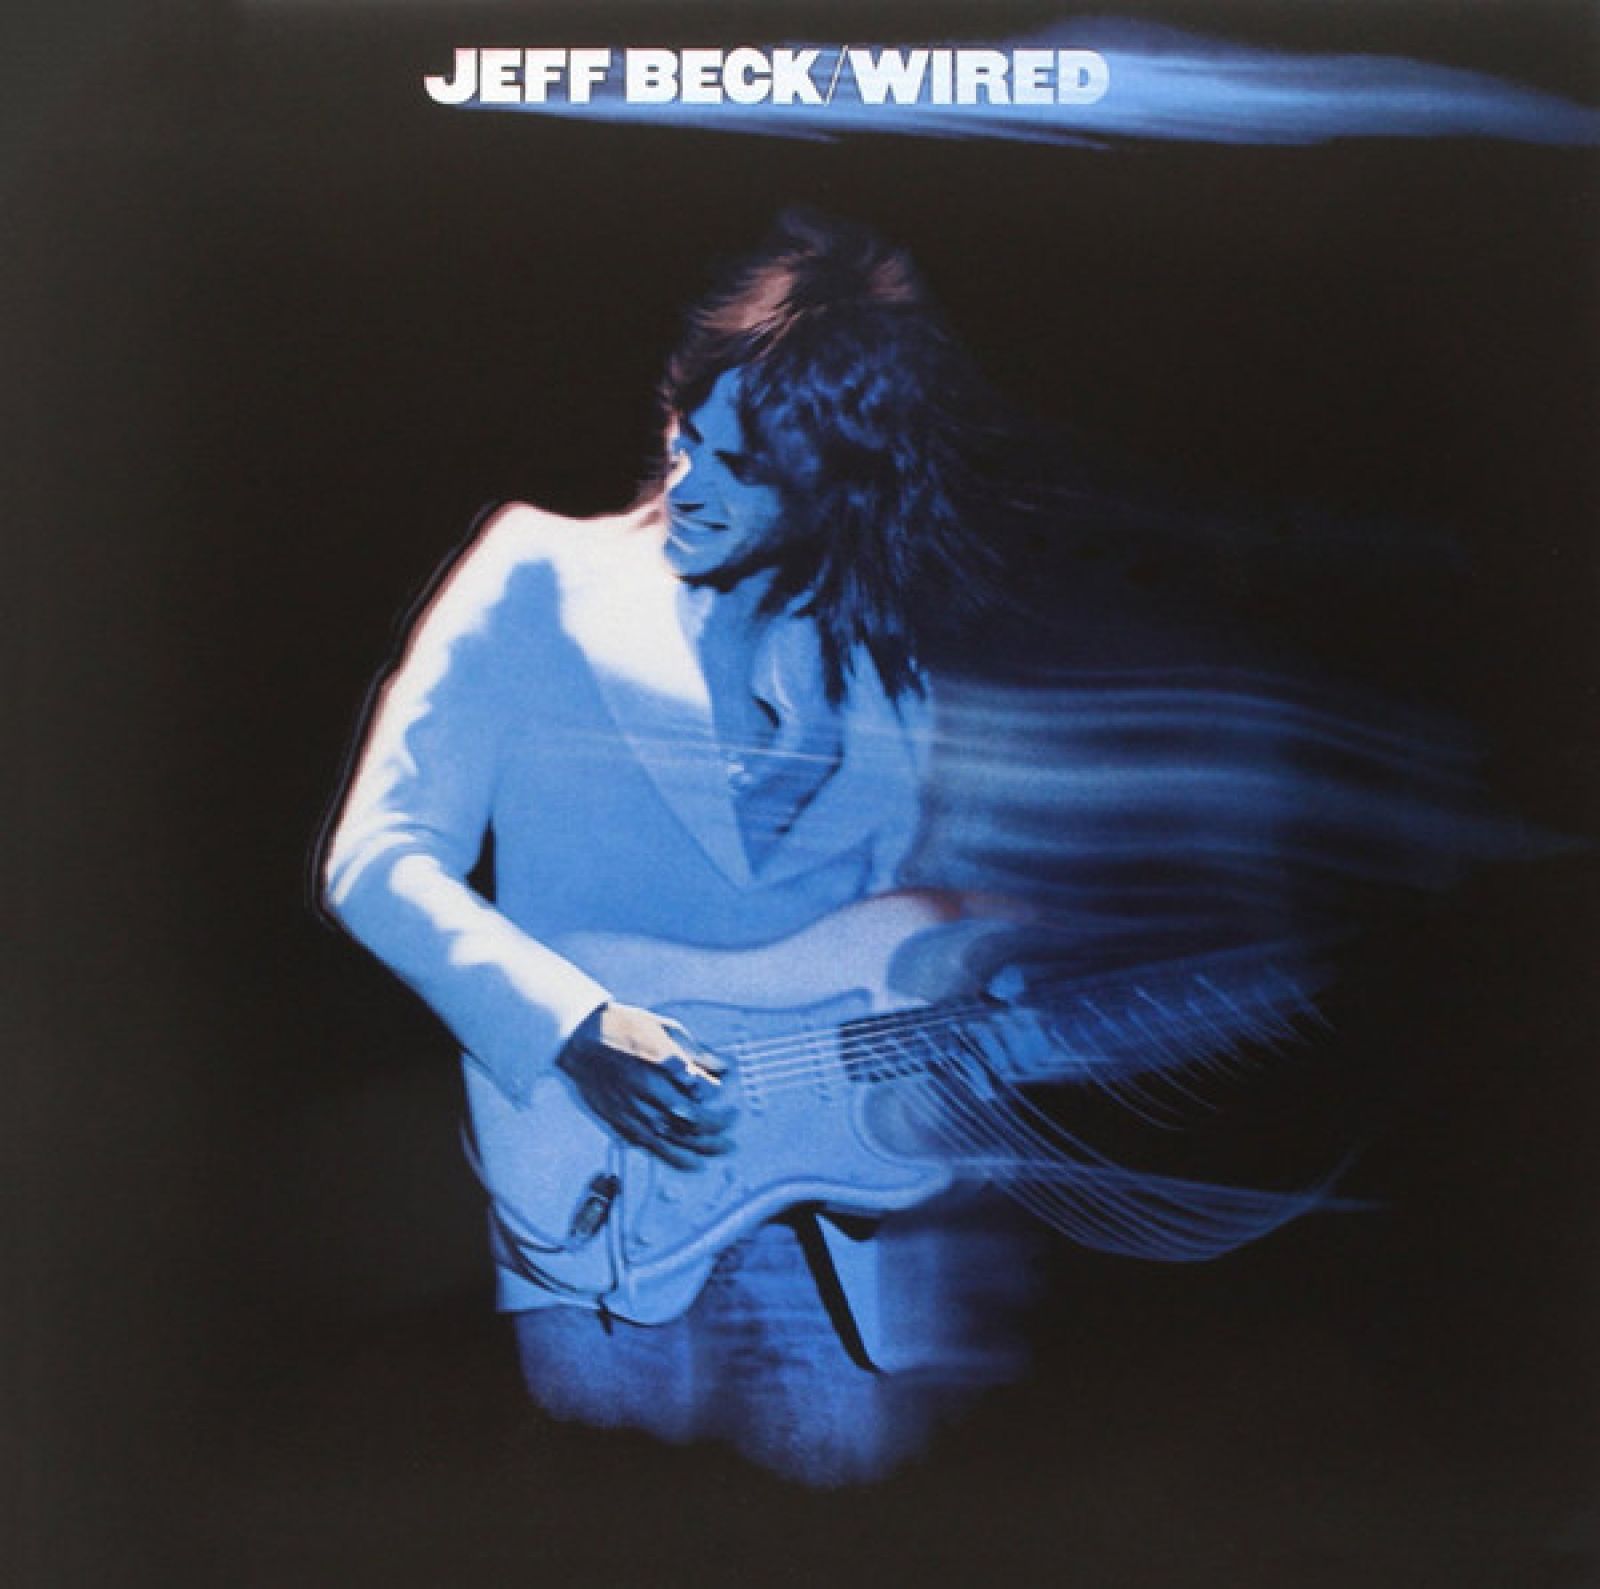 Виниловая пластинка Beck, Jeff, Wired (8713748980351) виниловая пластинка jeff beck blow by blow colour